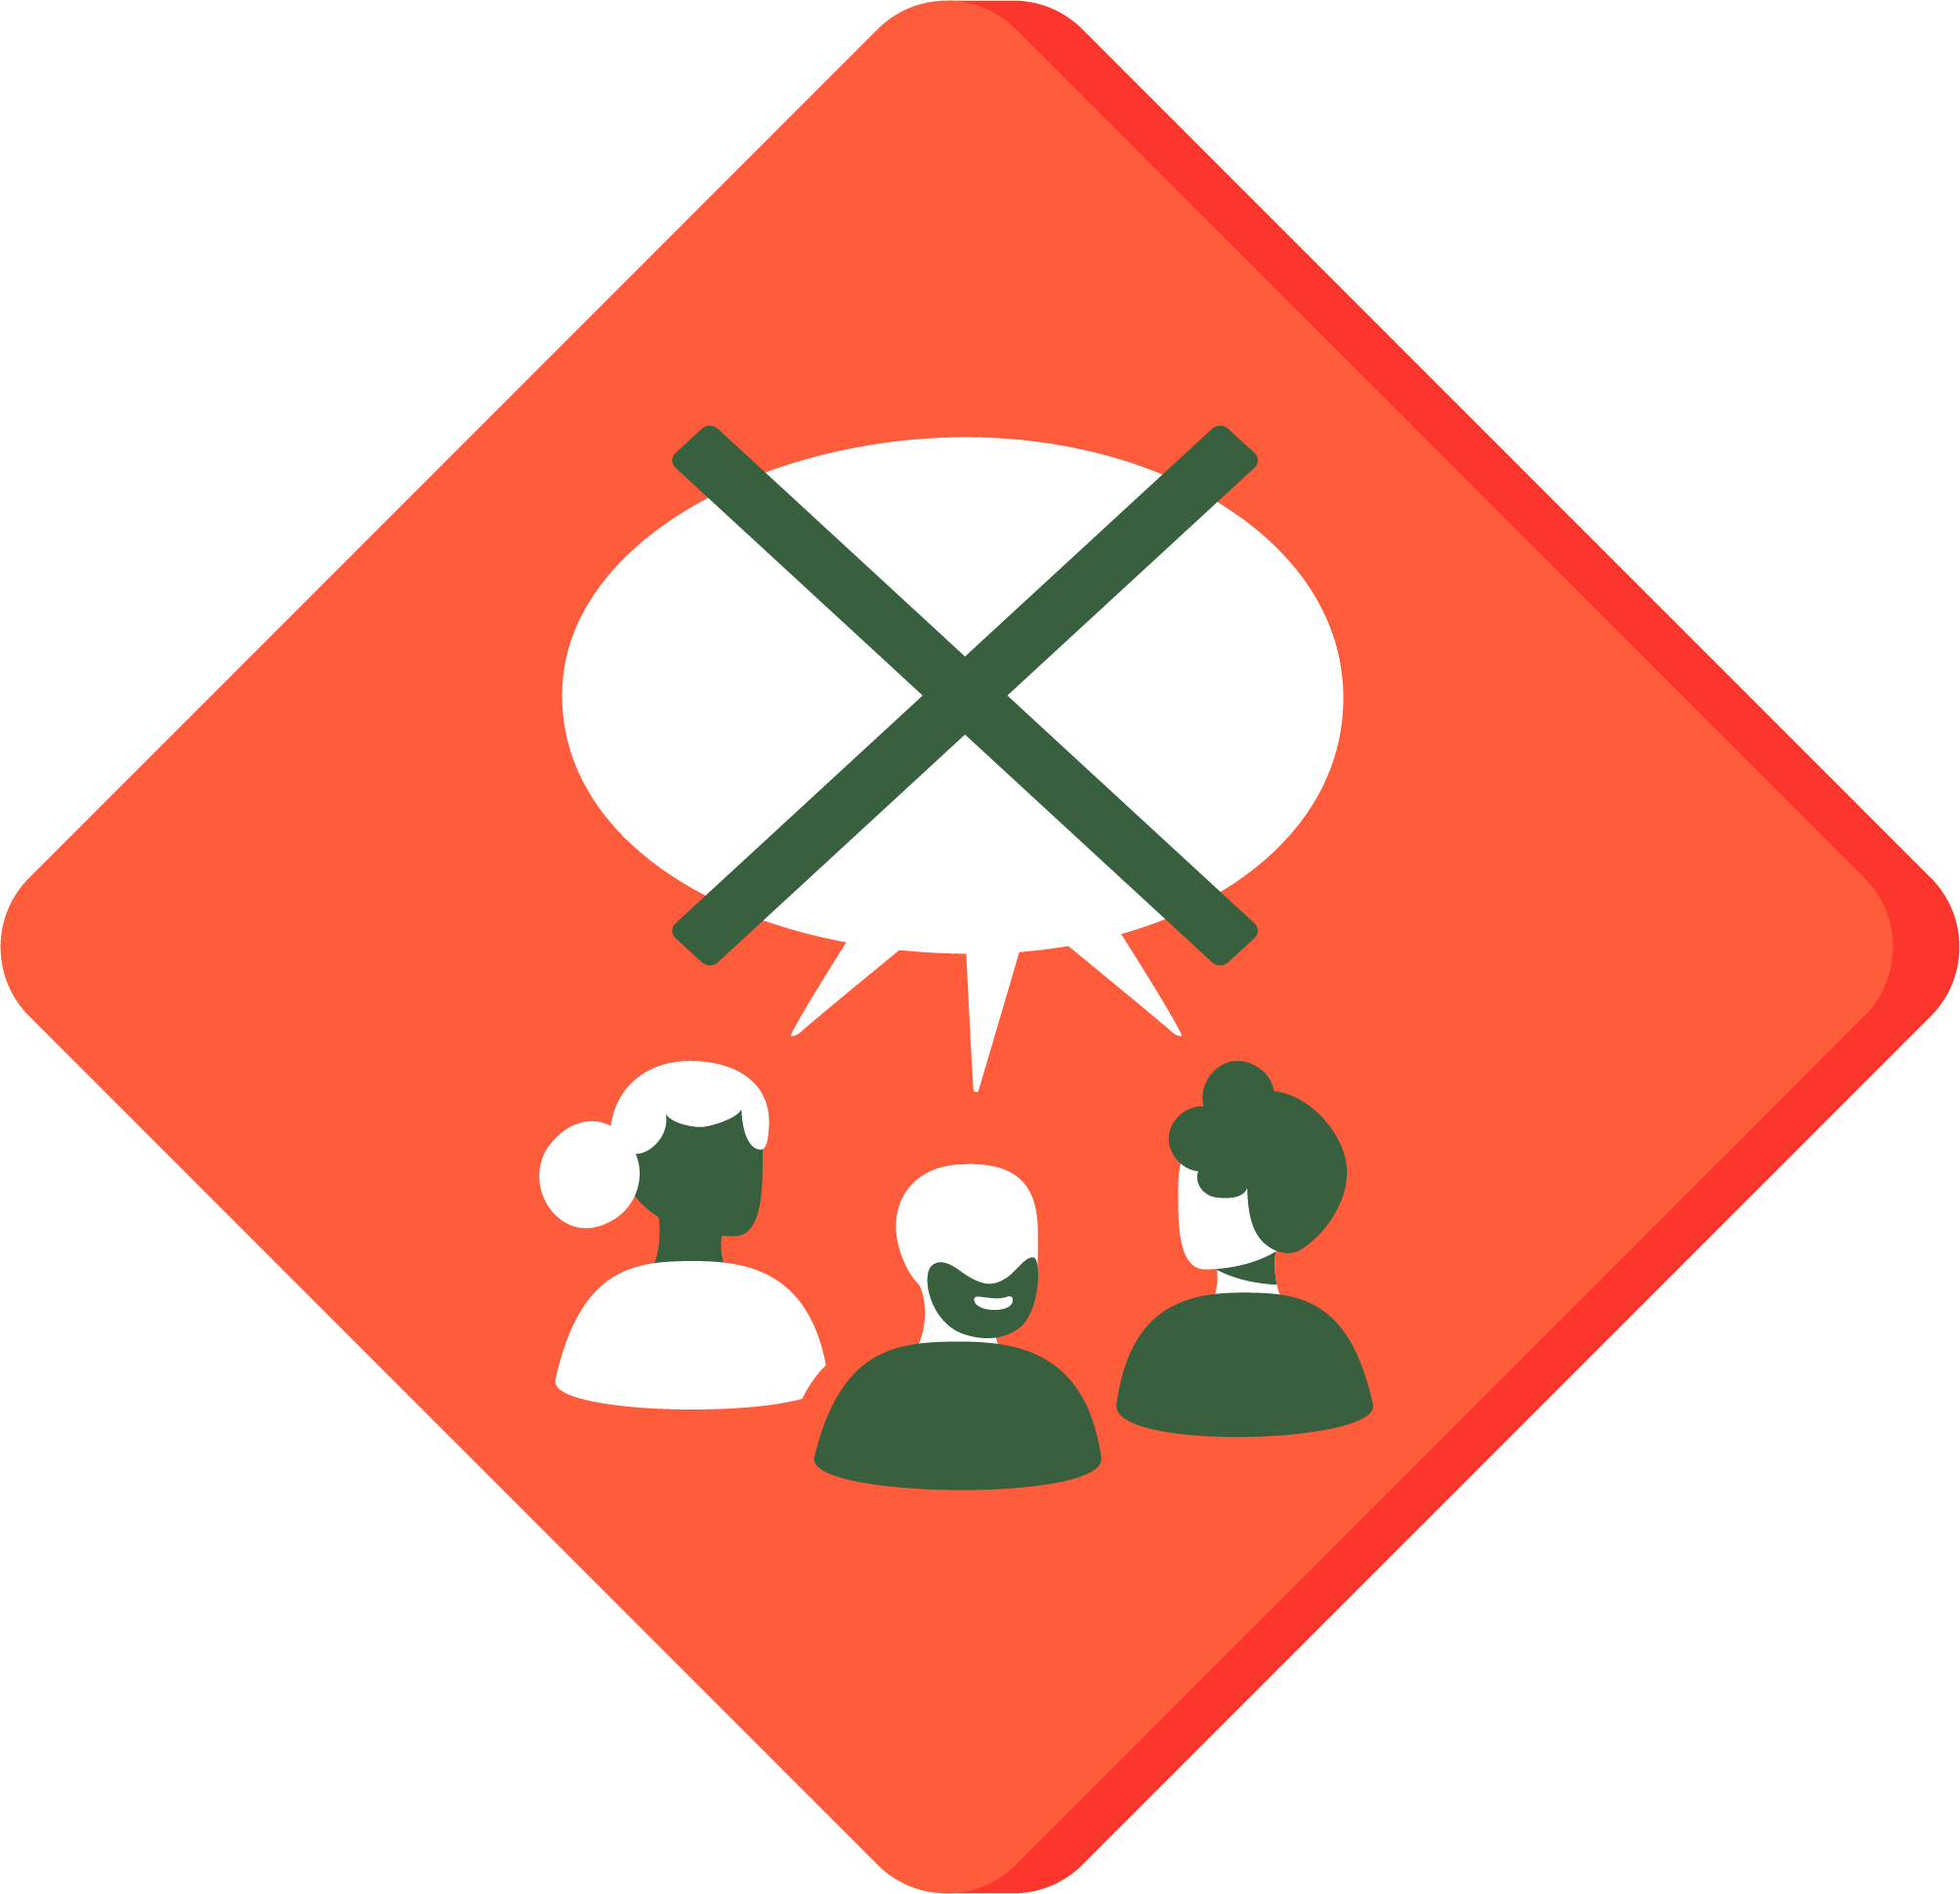 A red diamond shaped outline (like a warning sign) with figures in the middle who have empty speech bubbles above their heads.